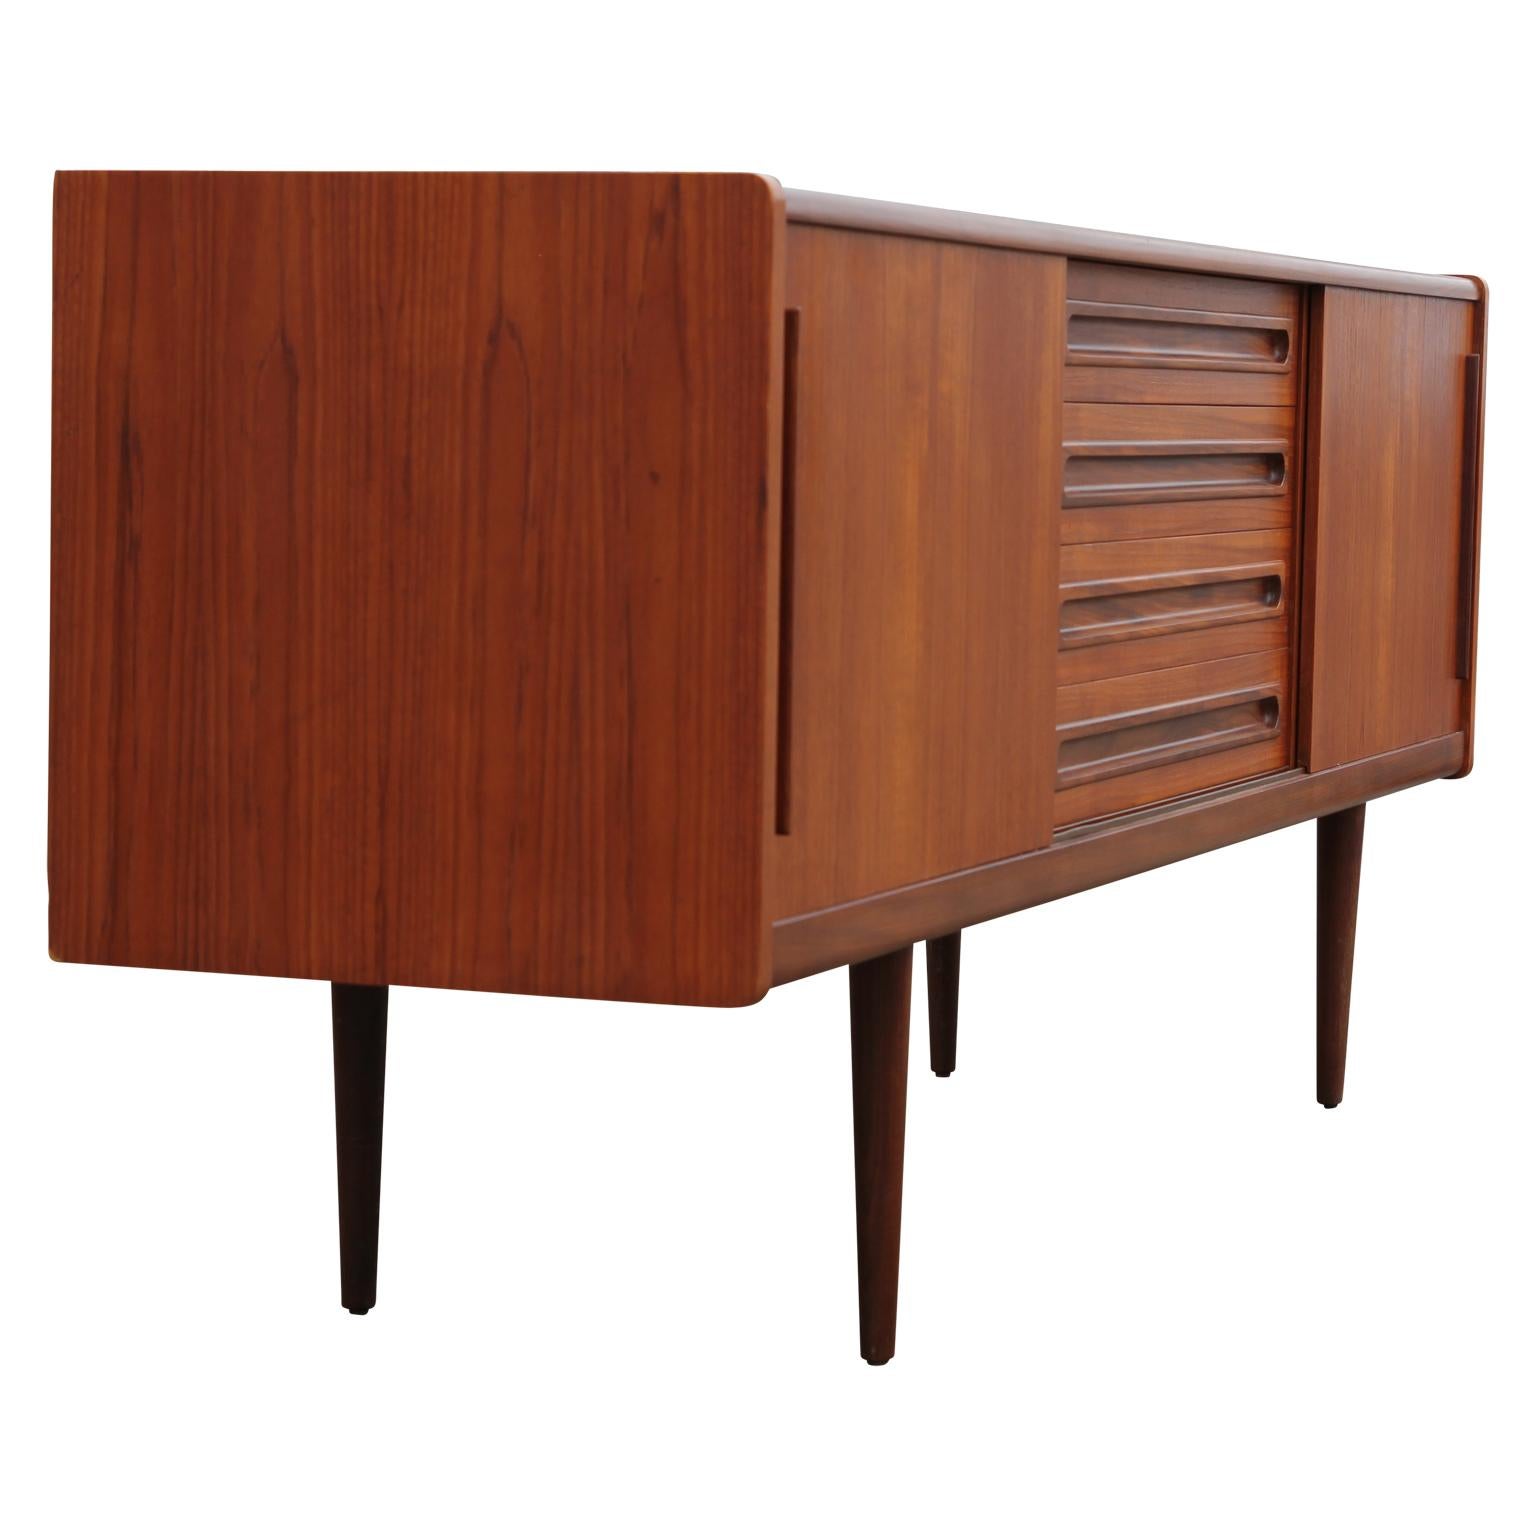 Mid-20th Century Danish Modern Teak Sideboard / Credenza with Drawers and Sliding Door Cabinets